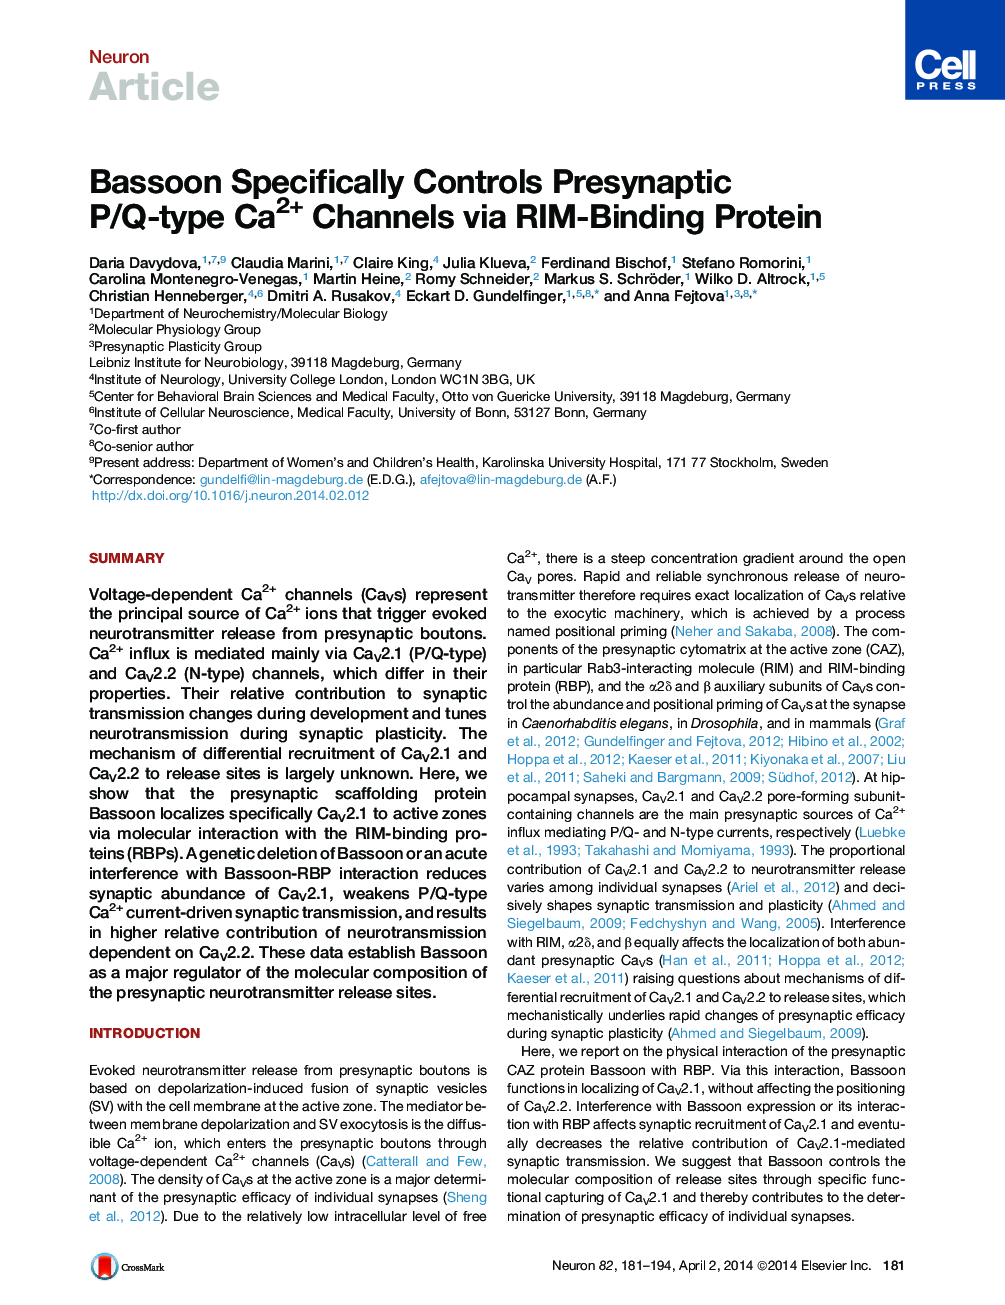 Bassoon Specifically Controls Presynaptic P/Q-type Ca2+ Channels via RIM-Binding Protein